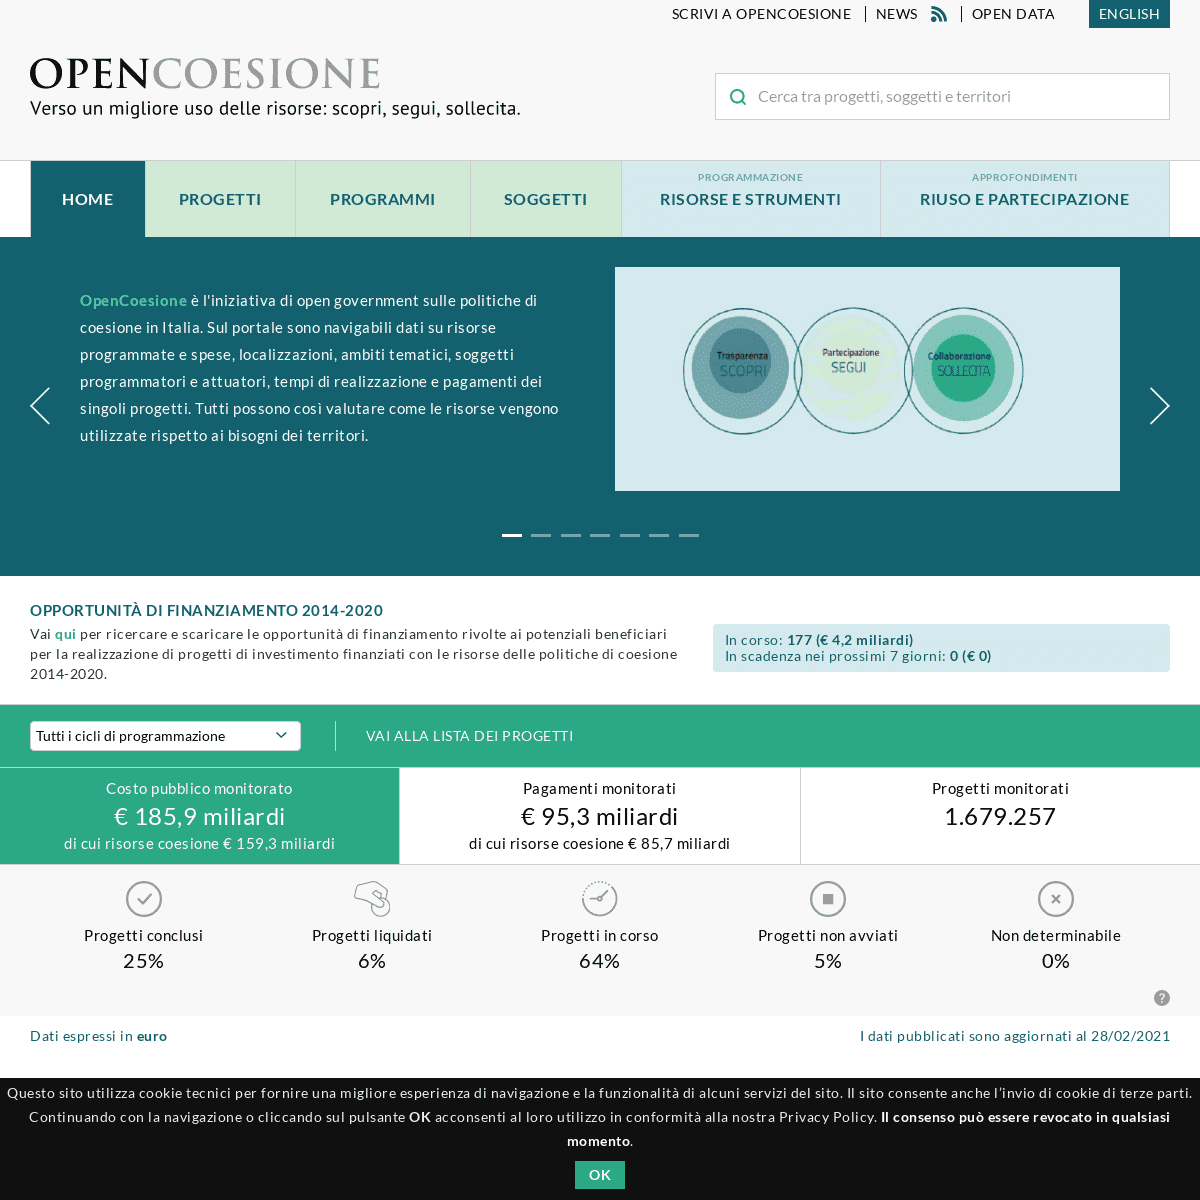 A complete backup of https://opencoesione.gov.it